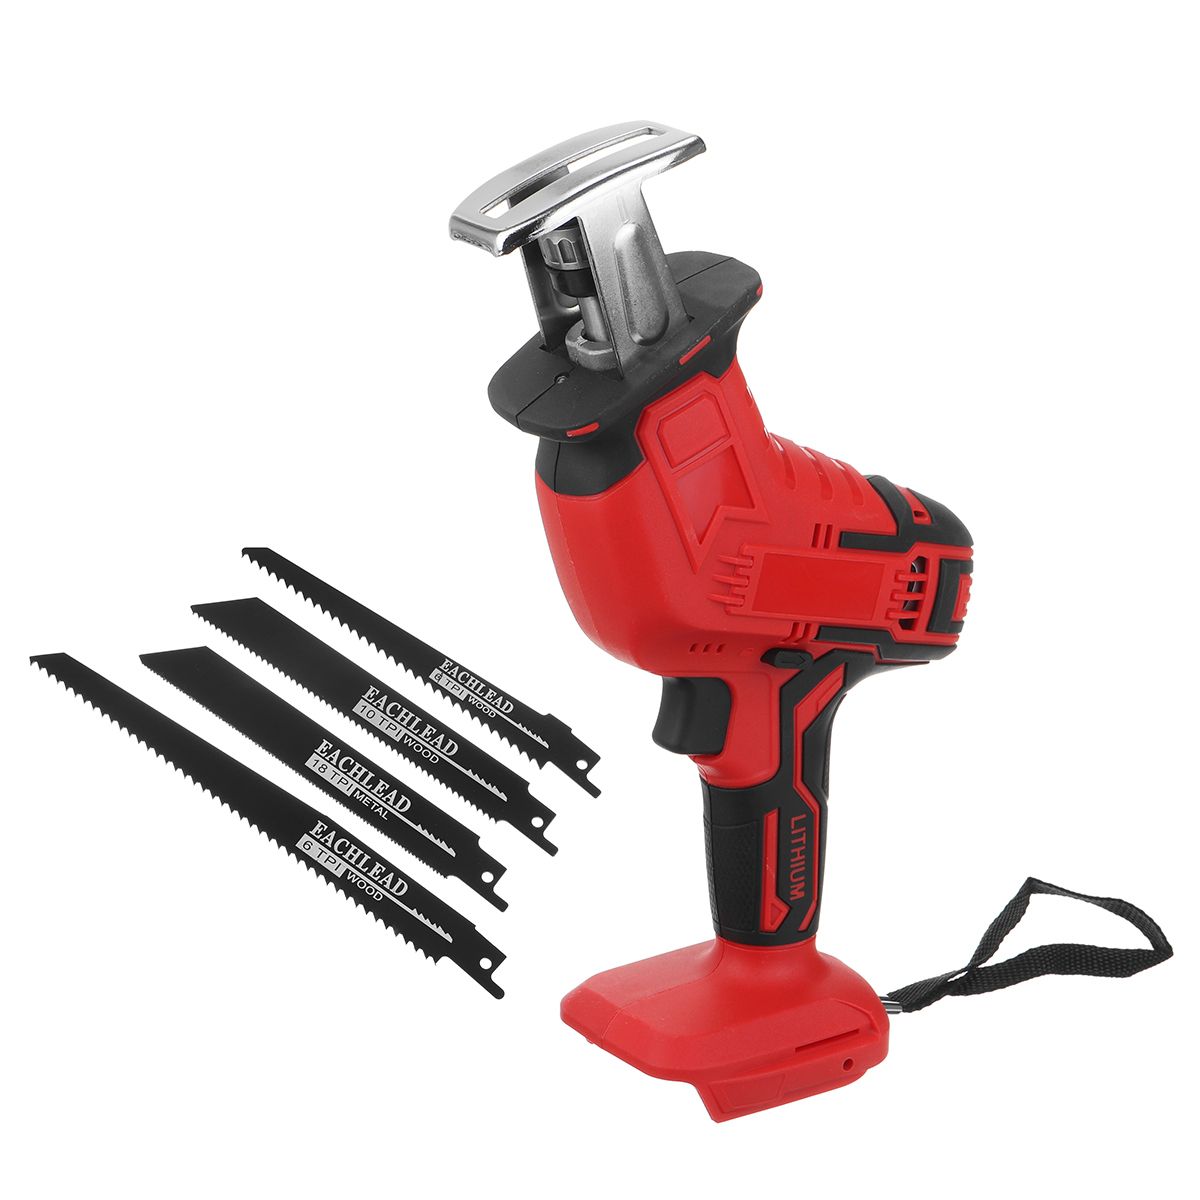 18V-Coedless-Handheld-Electric-Reciprocating-Saw-Electric-Saber-Saw-With-4X-Saw-Blades-Adapted-To-Ma-1662223